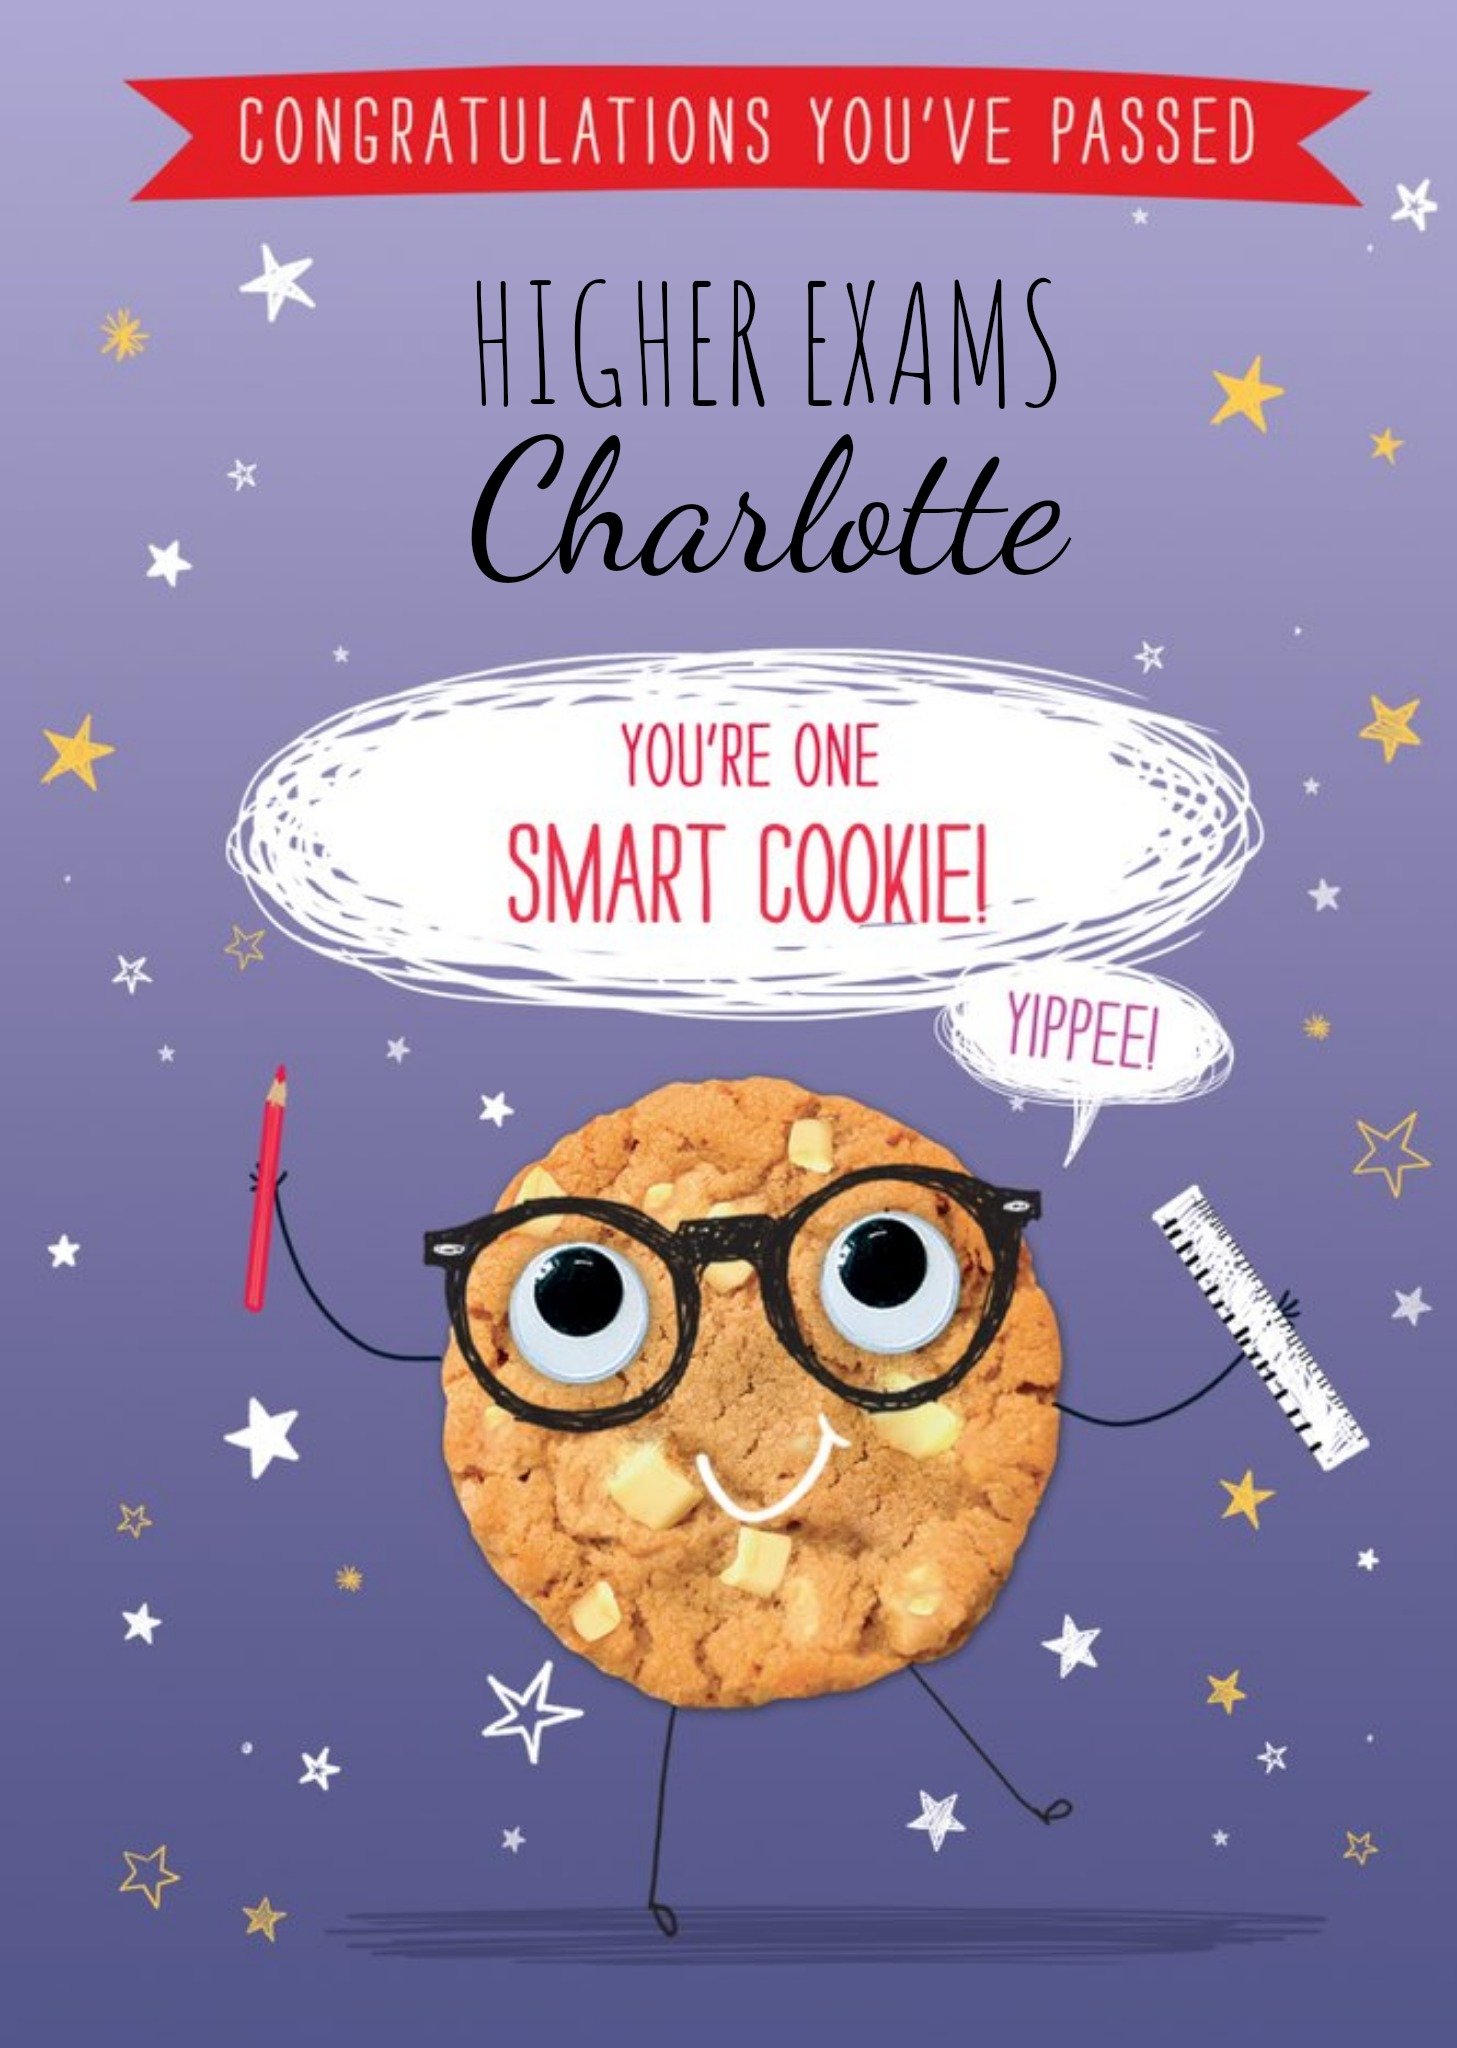 Moonpig Bright Illustration Of A Smart Cookie Congratulations You've Passed Higher Exams, Large Card